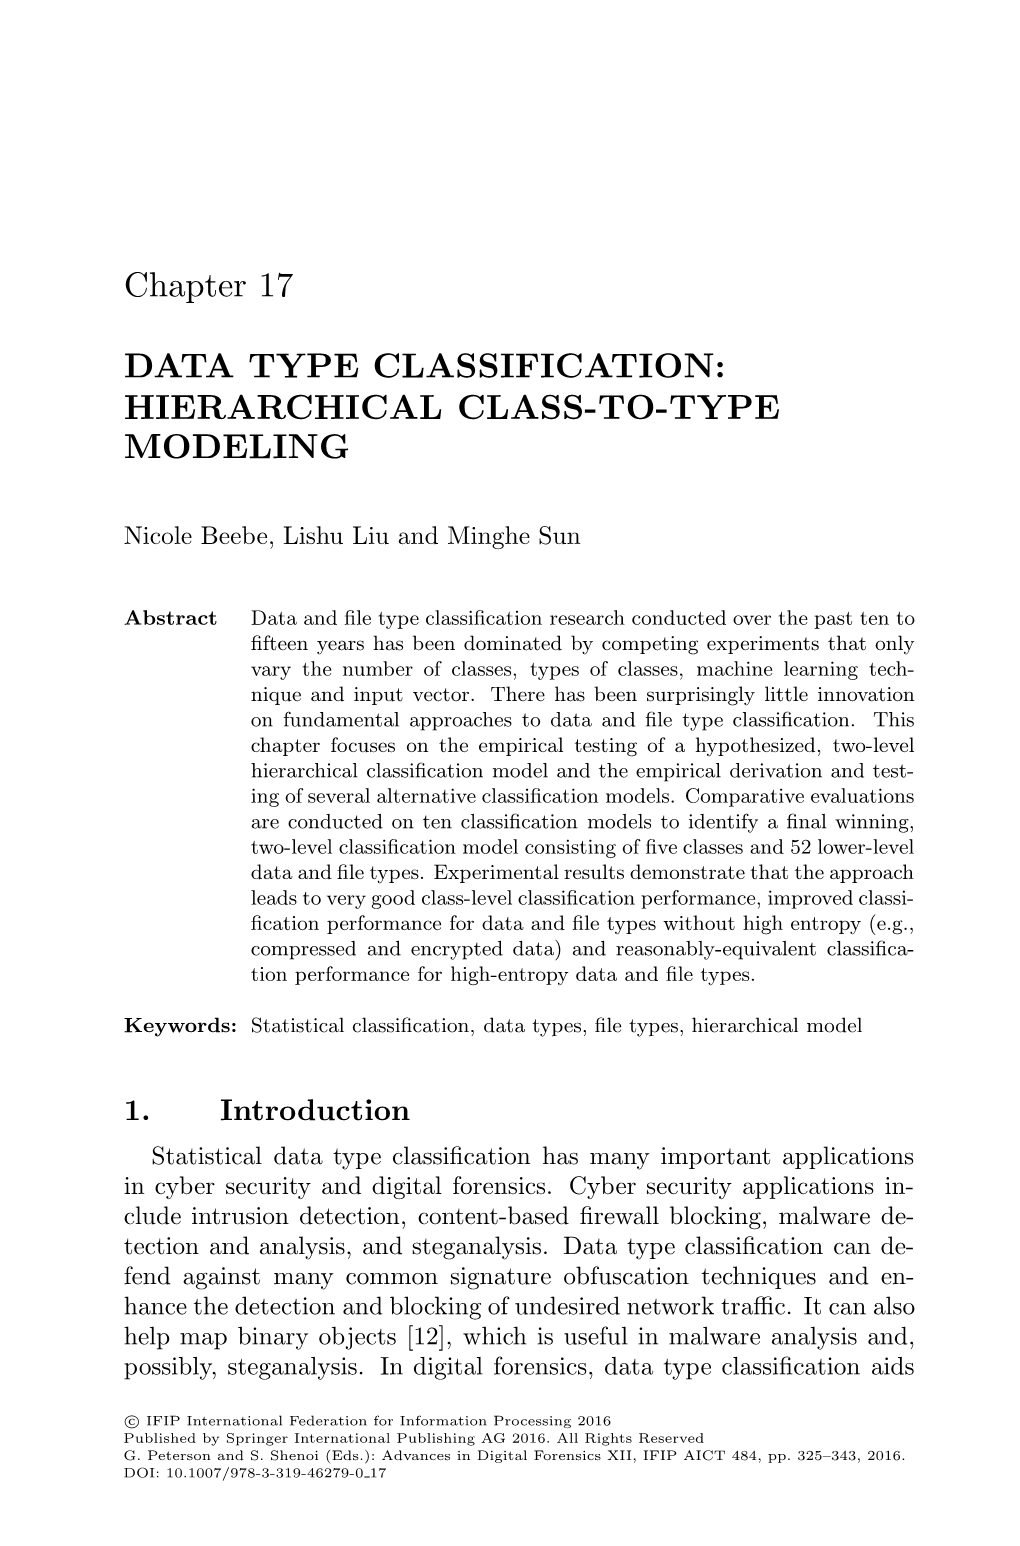 Chapter 17 DATA TYPE CLASSIFICATION: HIERARCHICAL